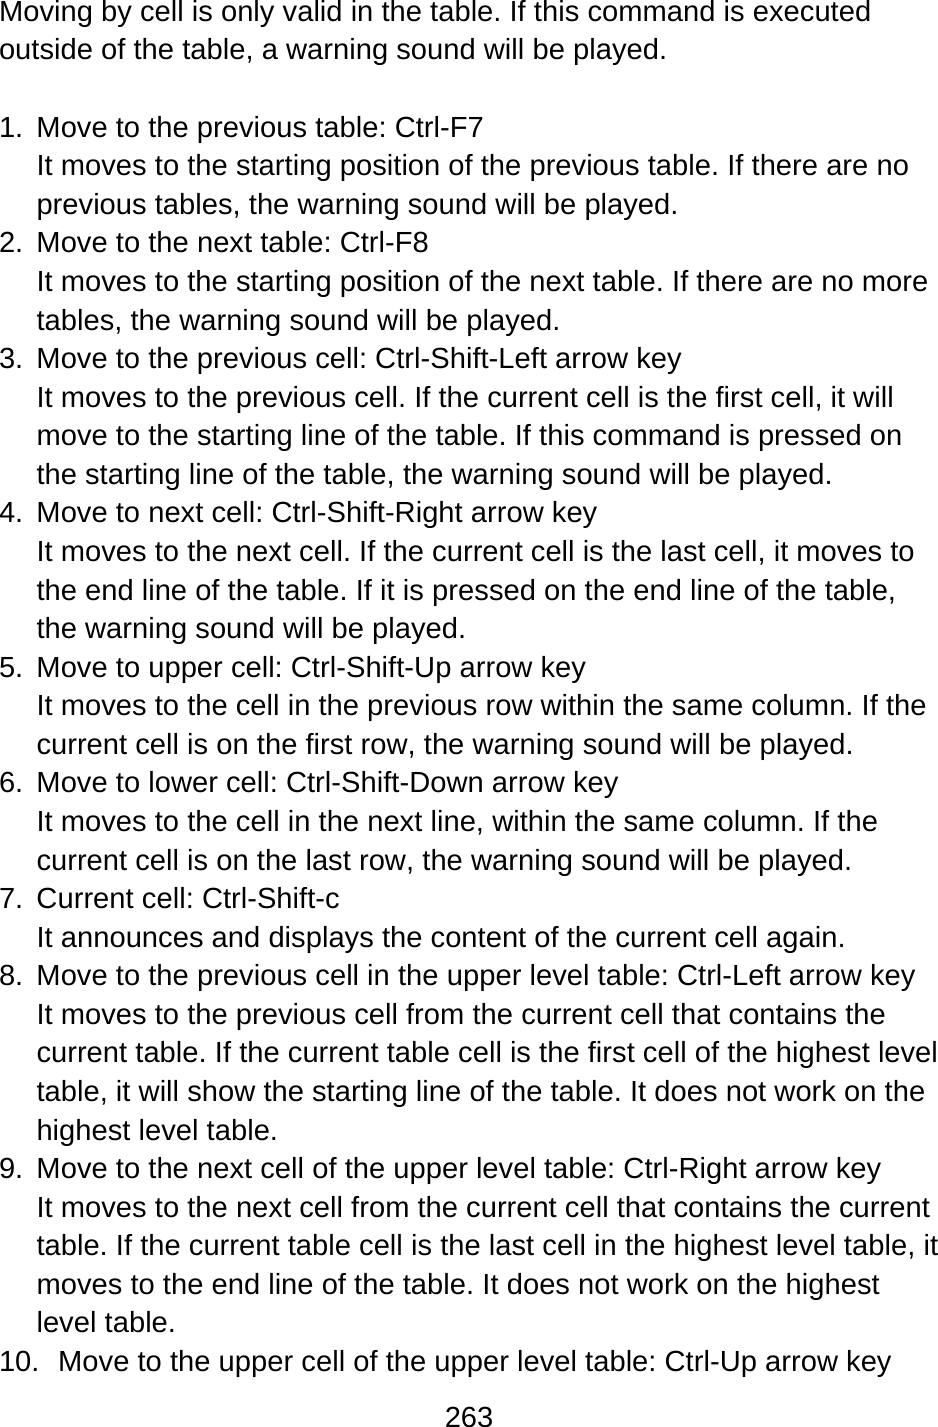 263  Moving by cell is only valid in the table. If this command is executed outside of the table, a warning sound will be played.  1.  Move to the previous table: Ctrl-F7 It moves to the starting position of the previous table. If there are no previous tables, the warning sound will be played. 2.  Move to the next table: Ctrl-F8 It moves to the starting position of the next table. If there are no more tables, the warning sound will be played. 3.  Move to the previous cell: Ctrl-Shift-Left arrow key It moves to the previous cell. If the current cell is the first cell, it will move to the starting line of the table. If this command is pressed on the starting line of the table, the warning sound will be played. 4.  Move to next cell: Ctrl-Shift-Right arrow key It moves to the next cell. If the current cell is the last cell, it moves to the end line of the table. If it is pressed on the end line of the table, the warning sound will be played. 5.  Move to upper cell: Ctrl-Shift-Up arrow key It moves to the cell in the previous row within the same column. If the current cell is on the first row, the warning sound will be played. 6.  Move to lower cell: Ctrl-Shift-Down arrow key It moves to the cell in the next line, within the same column. If the current cell is on the last row, the warning sound will be played. 7.  Current cell: Ctrl-Shift-c It announces and displays the content of the current cell again. 8.  Move to the previous cell in the upper level table: Ctrl-Left arrow key It moves to the previous cell from the current cell that contains the current table. If the current table cell is the first cell of the highest level table, it will show the starting line of the table. It does not work on the highest level table. 9.  Move to the next cell of the upper level table: Ctrl-Right arrow key It moves to the next cell from the current cell that contains the current table. If the current table cell is the last cell in the highest level table, it moves to the end line of the table. It does not work on the highest level table. 10.  Move to the upper cell of the upper level table: Ctrl-Up arrow key 